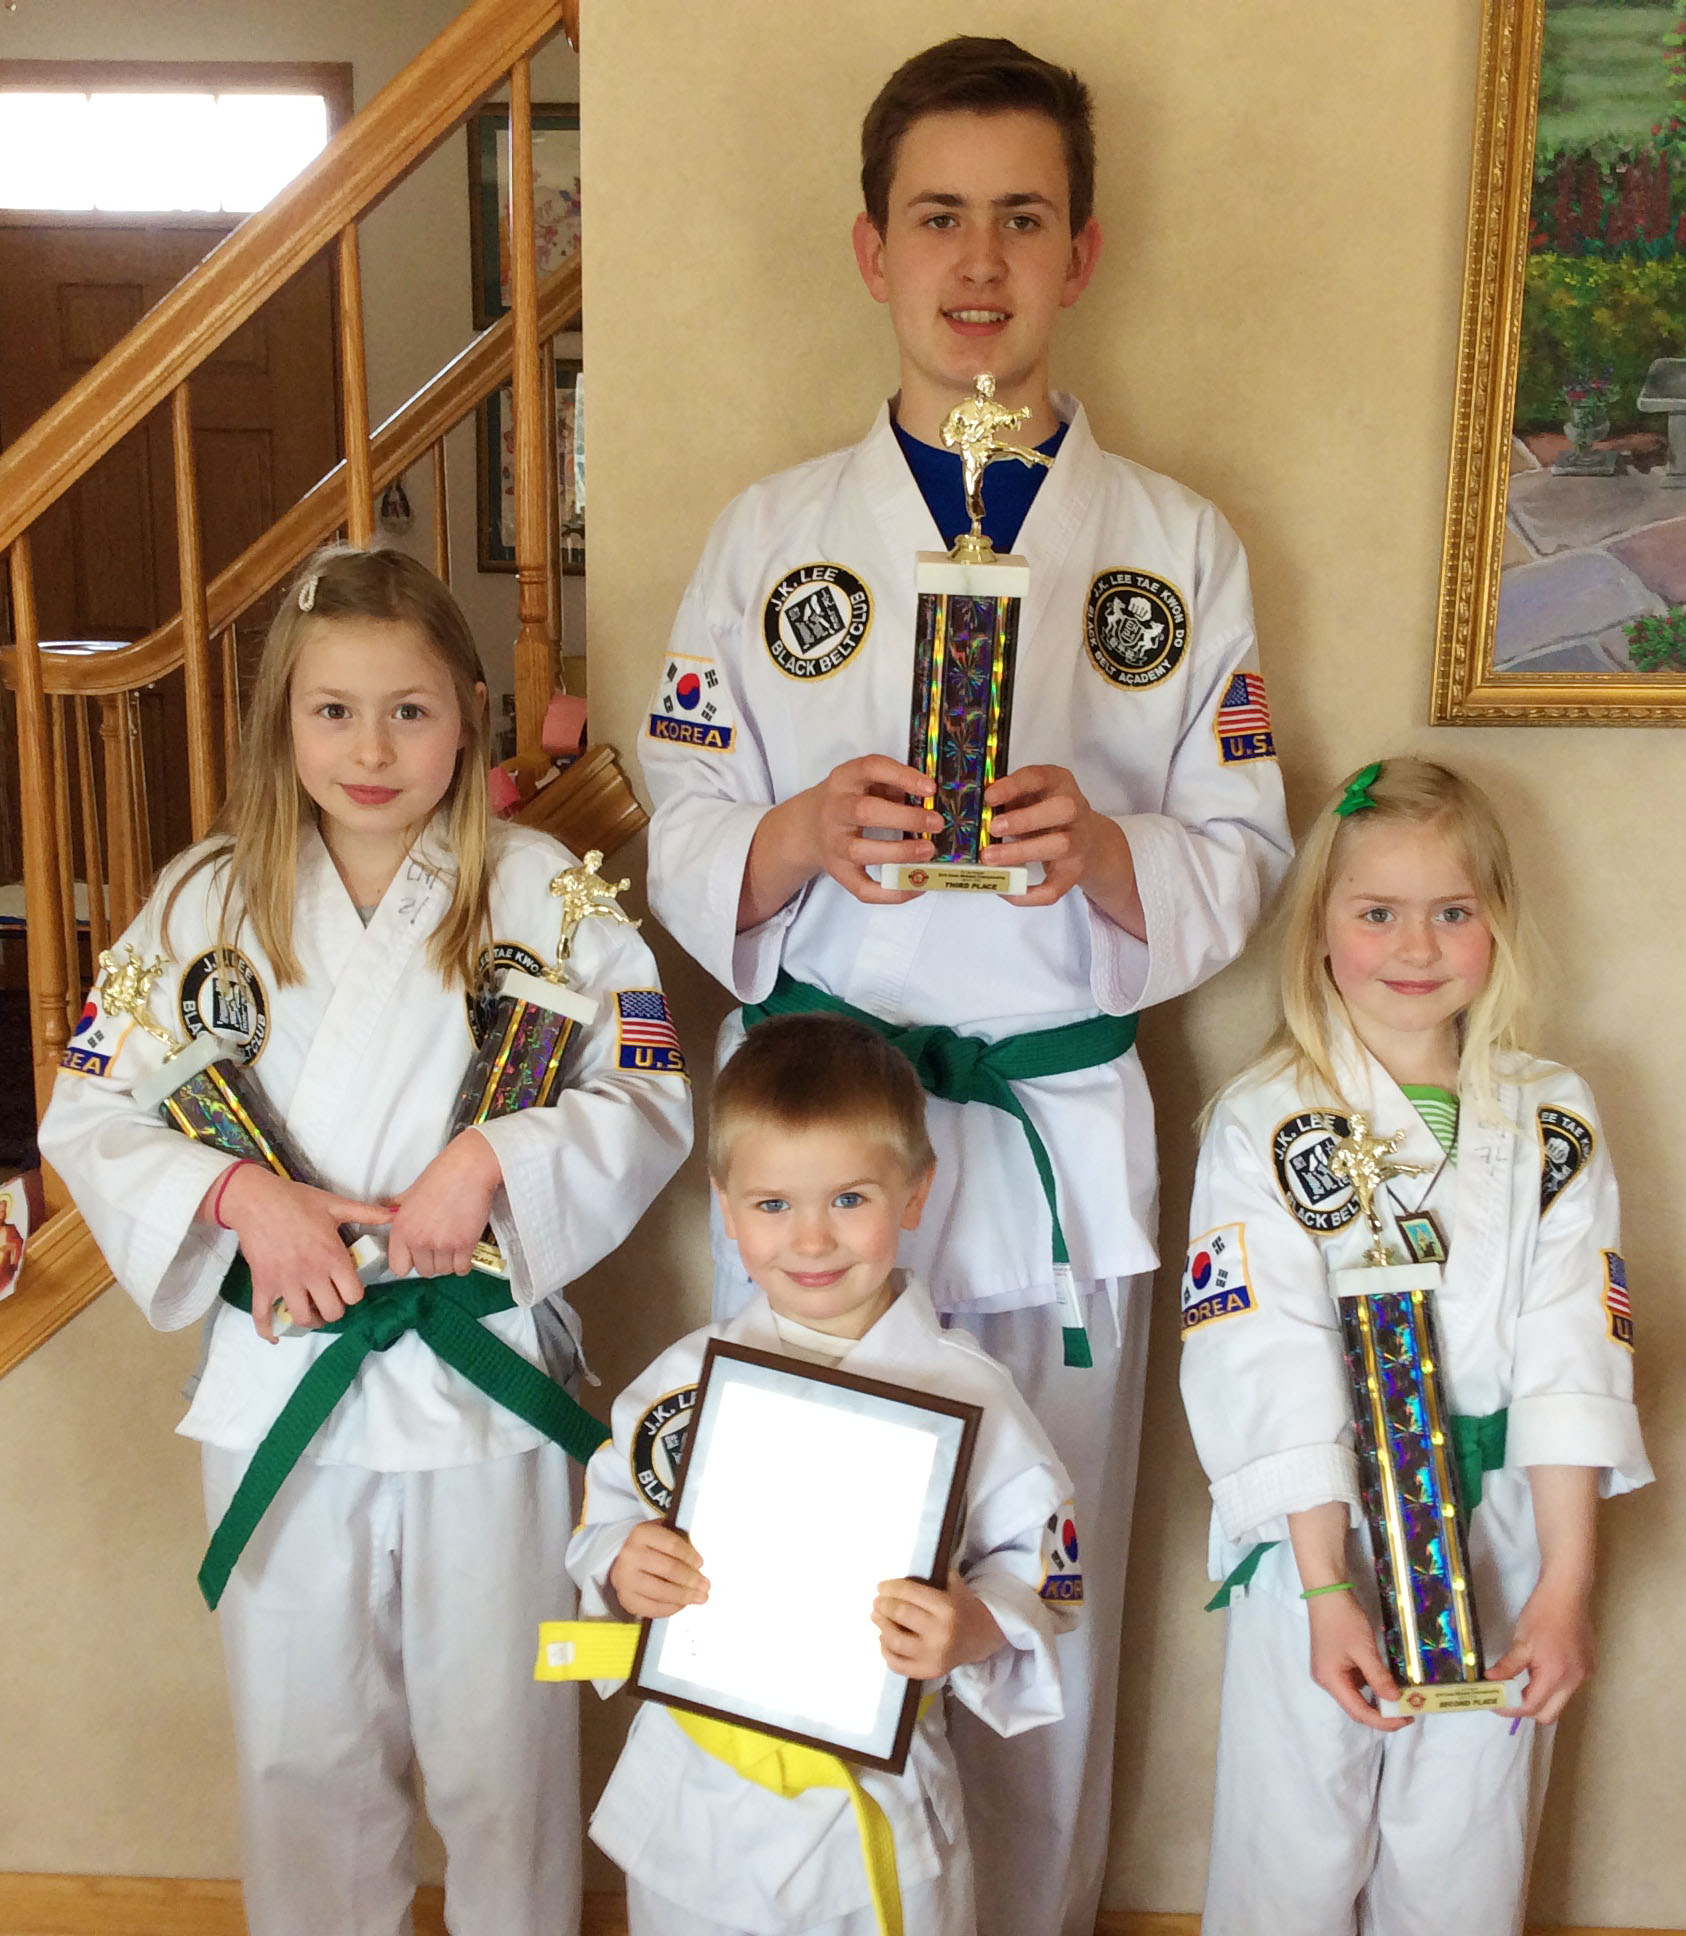 Seton Siblings Place 1st in Tae Kwon Do Family Forms